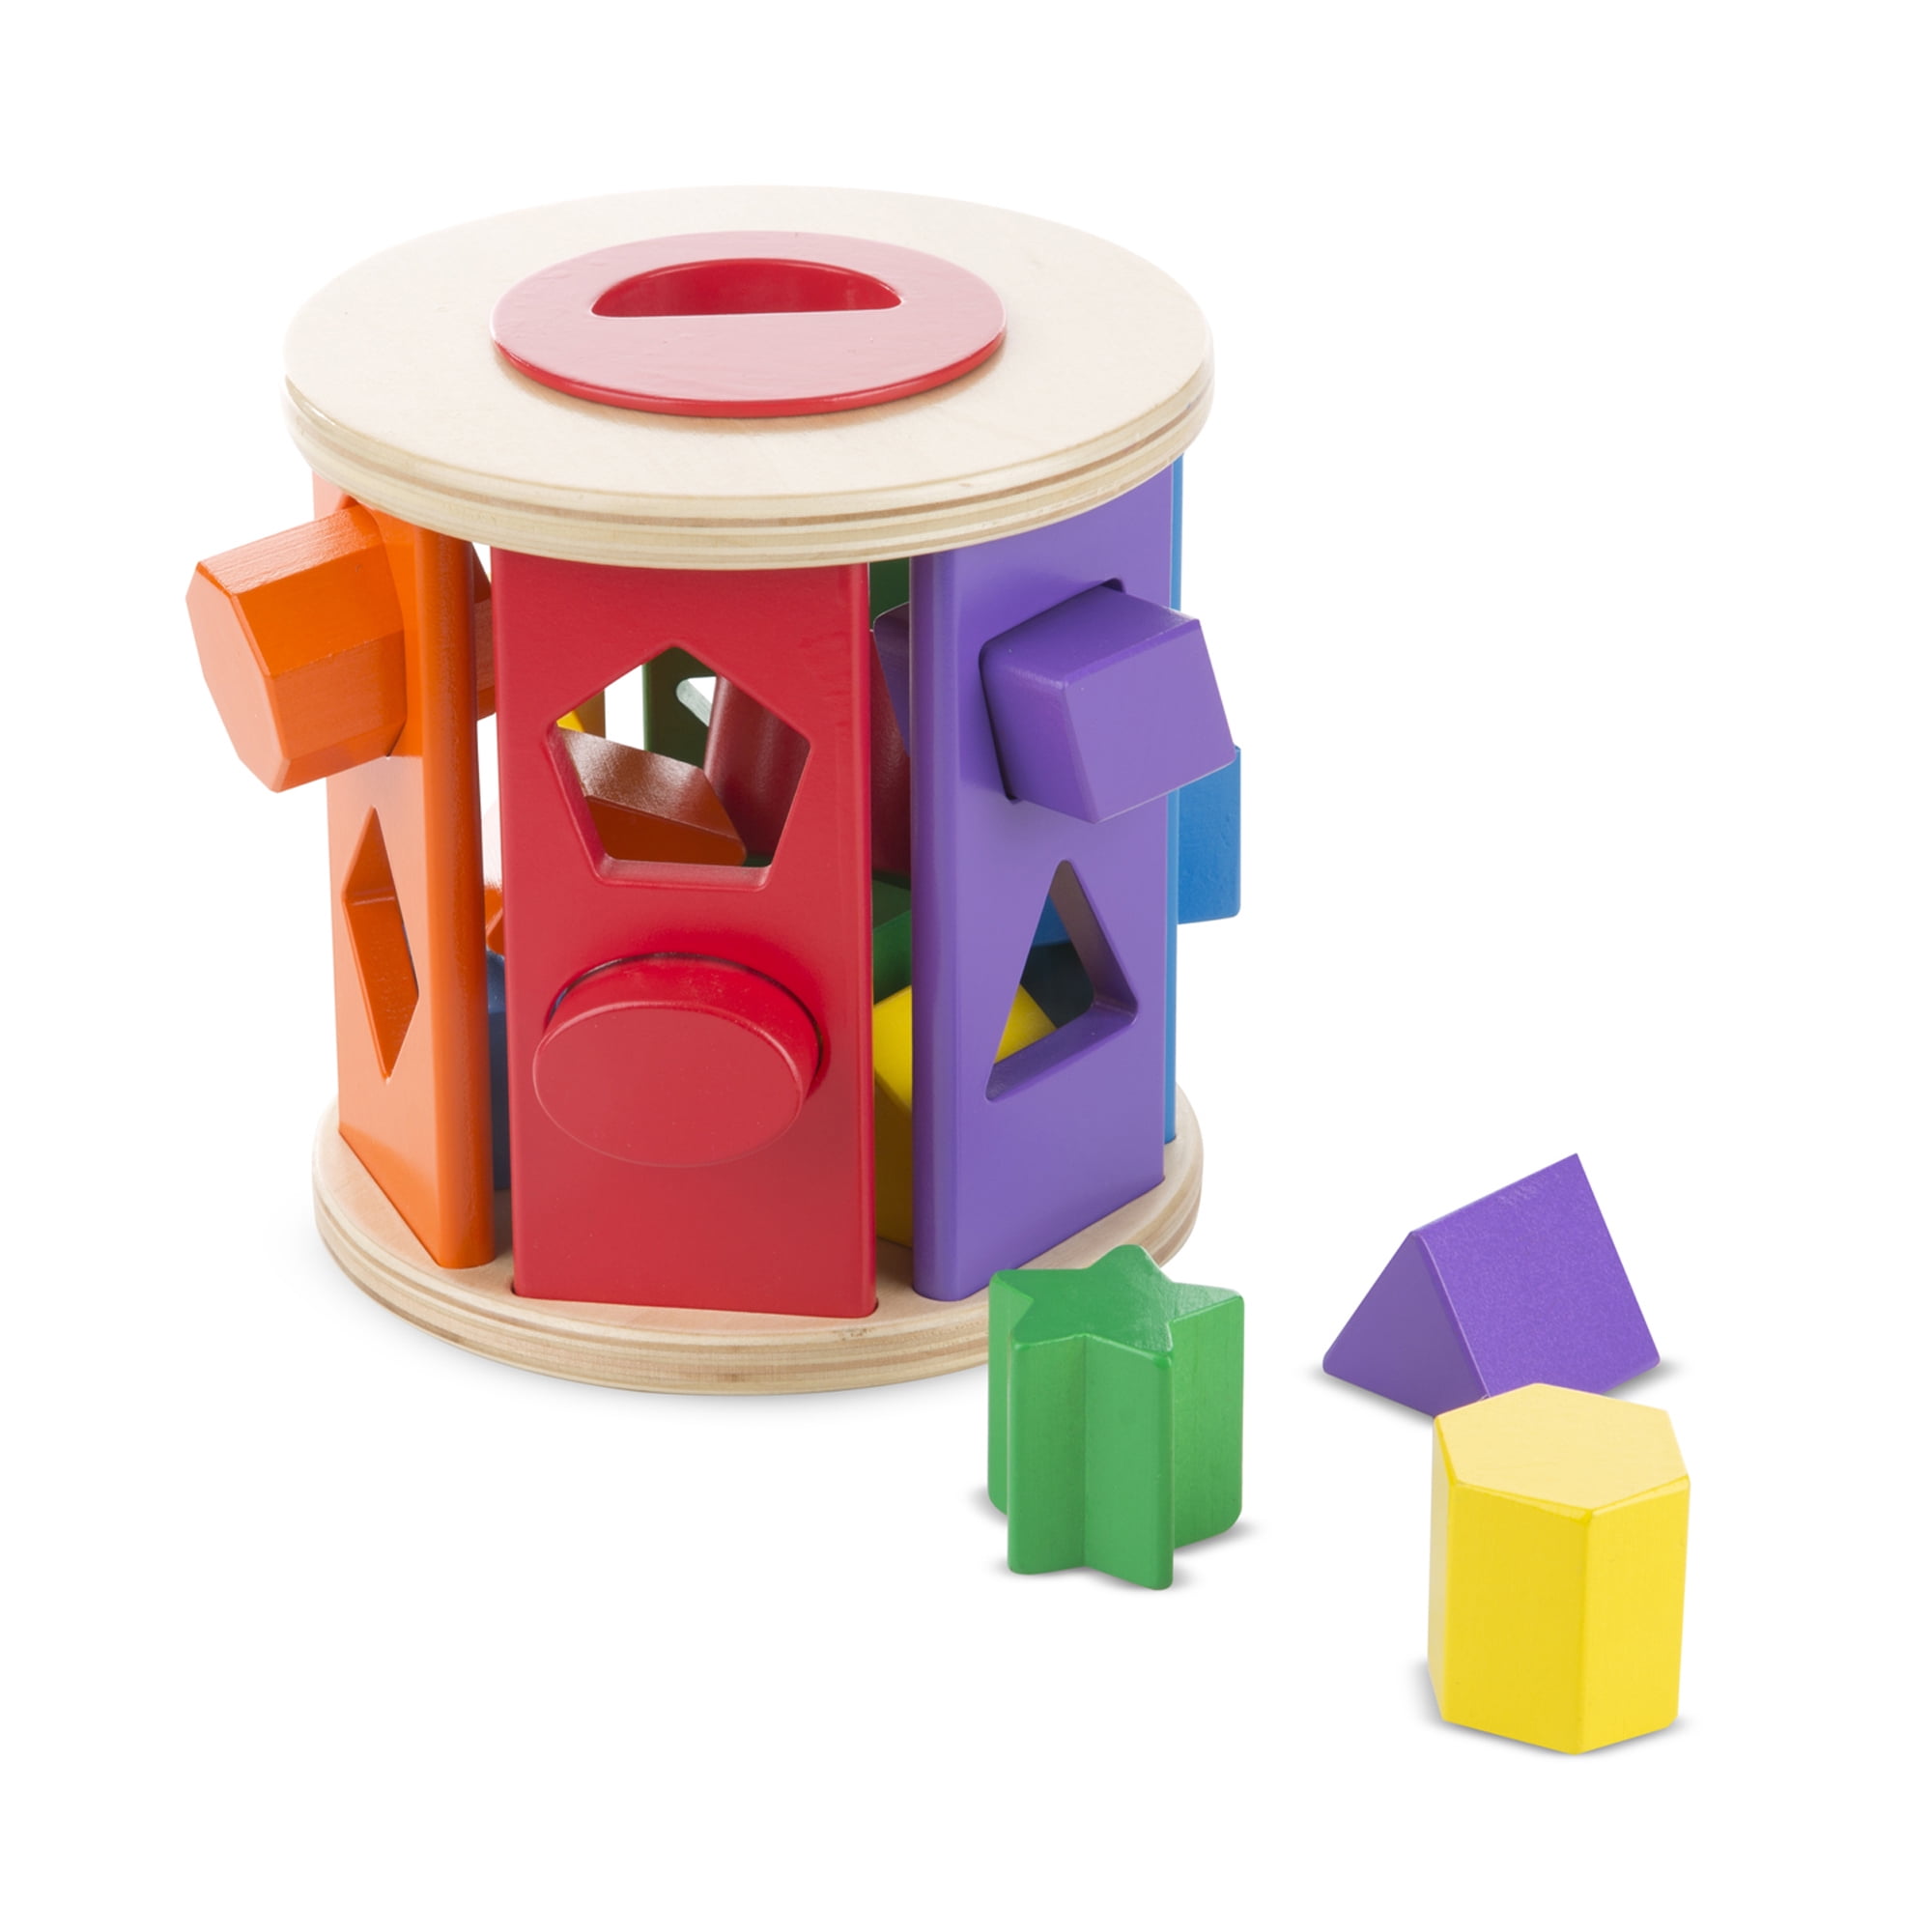 Melissa & Doug Classic Wooden Toy Match and Roll Shape Sorter 